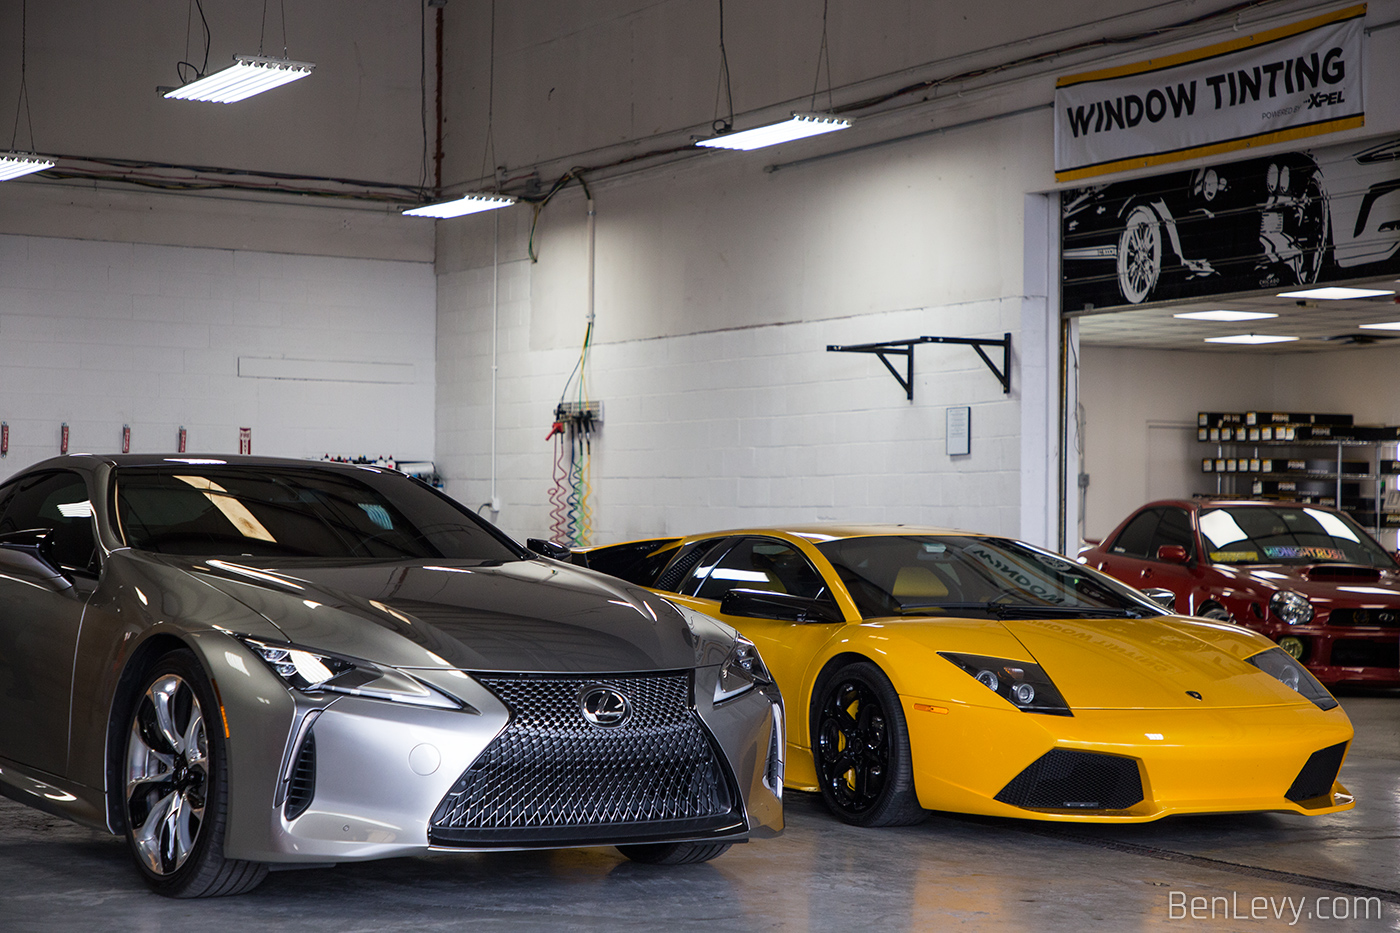 LC500 and Murcielago in the Chicago Auto Pros Glenview Shop